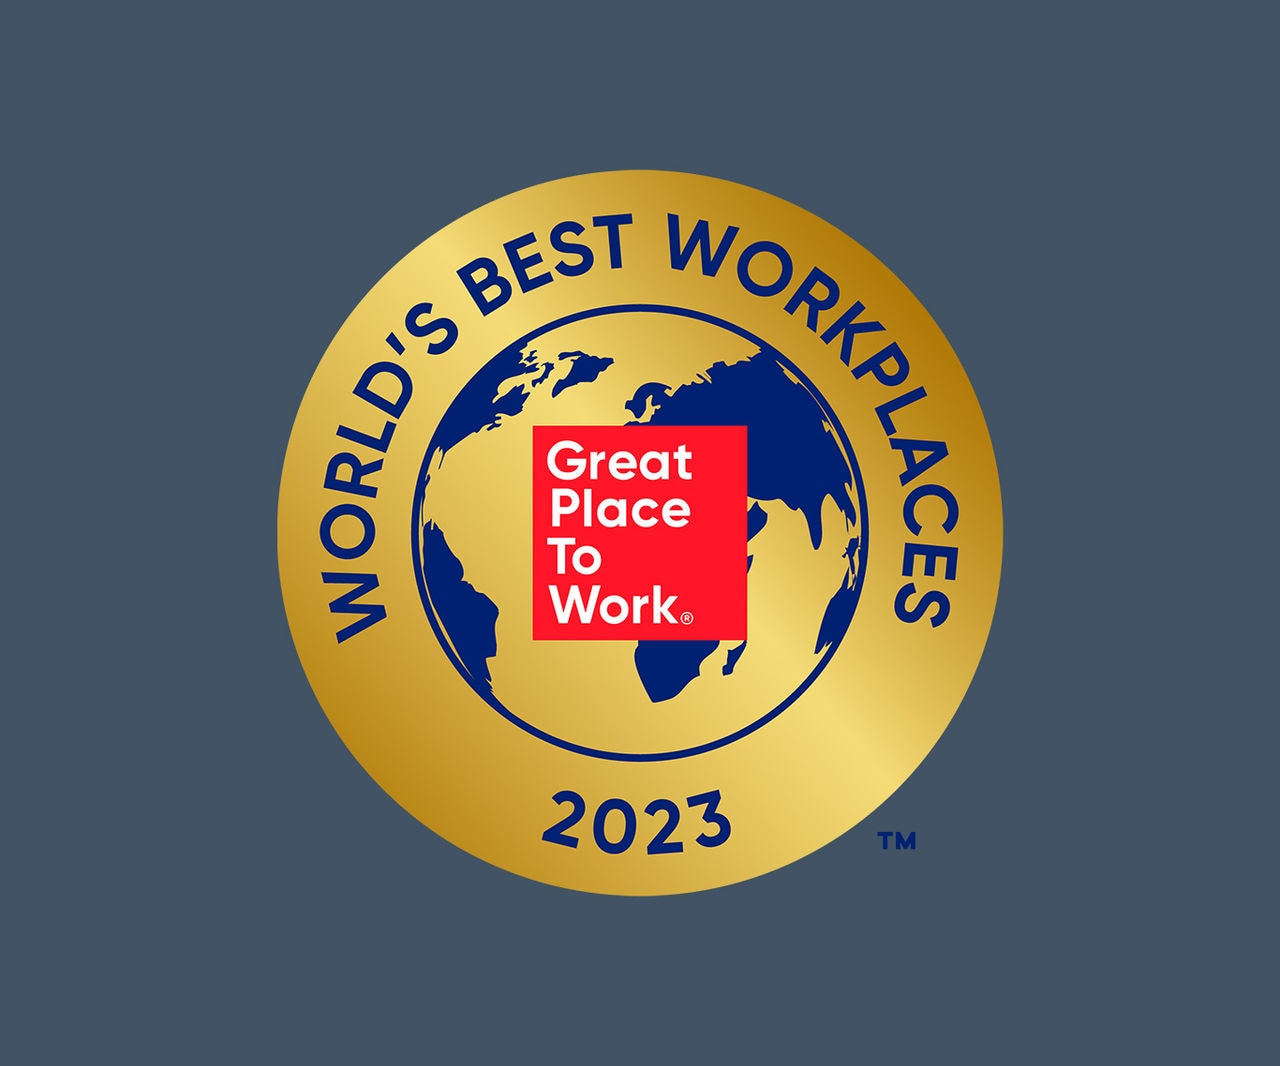 World's Best Workplaces 2023 Great Place To Work